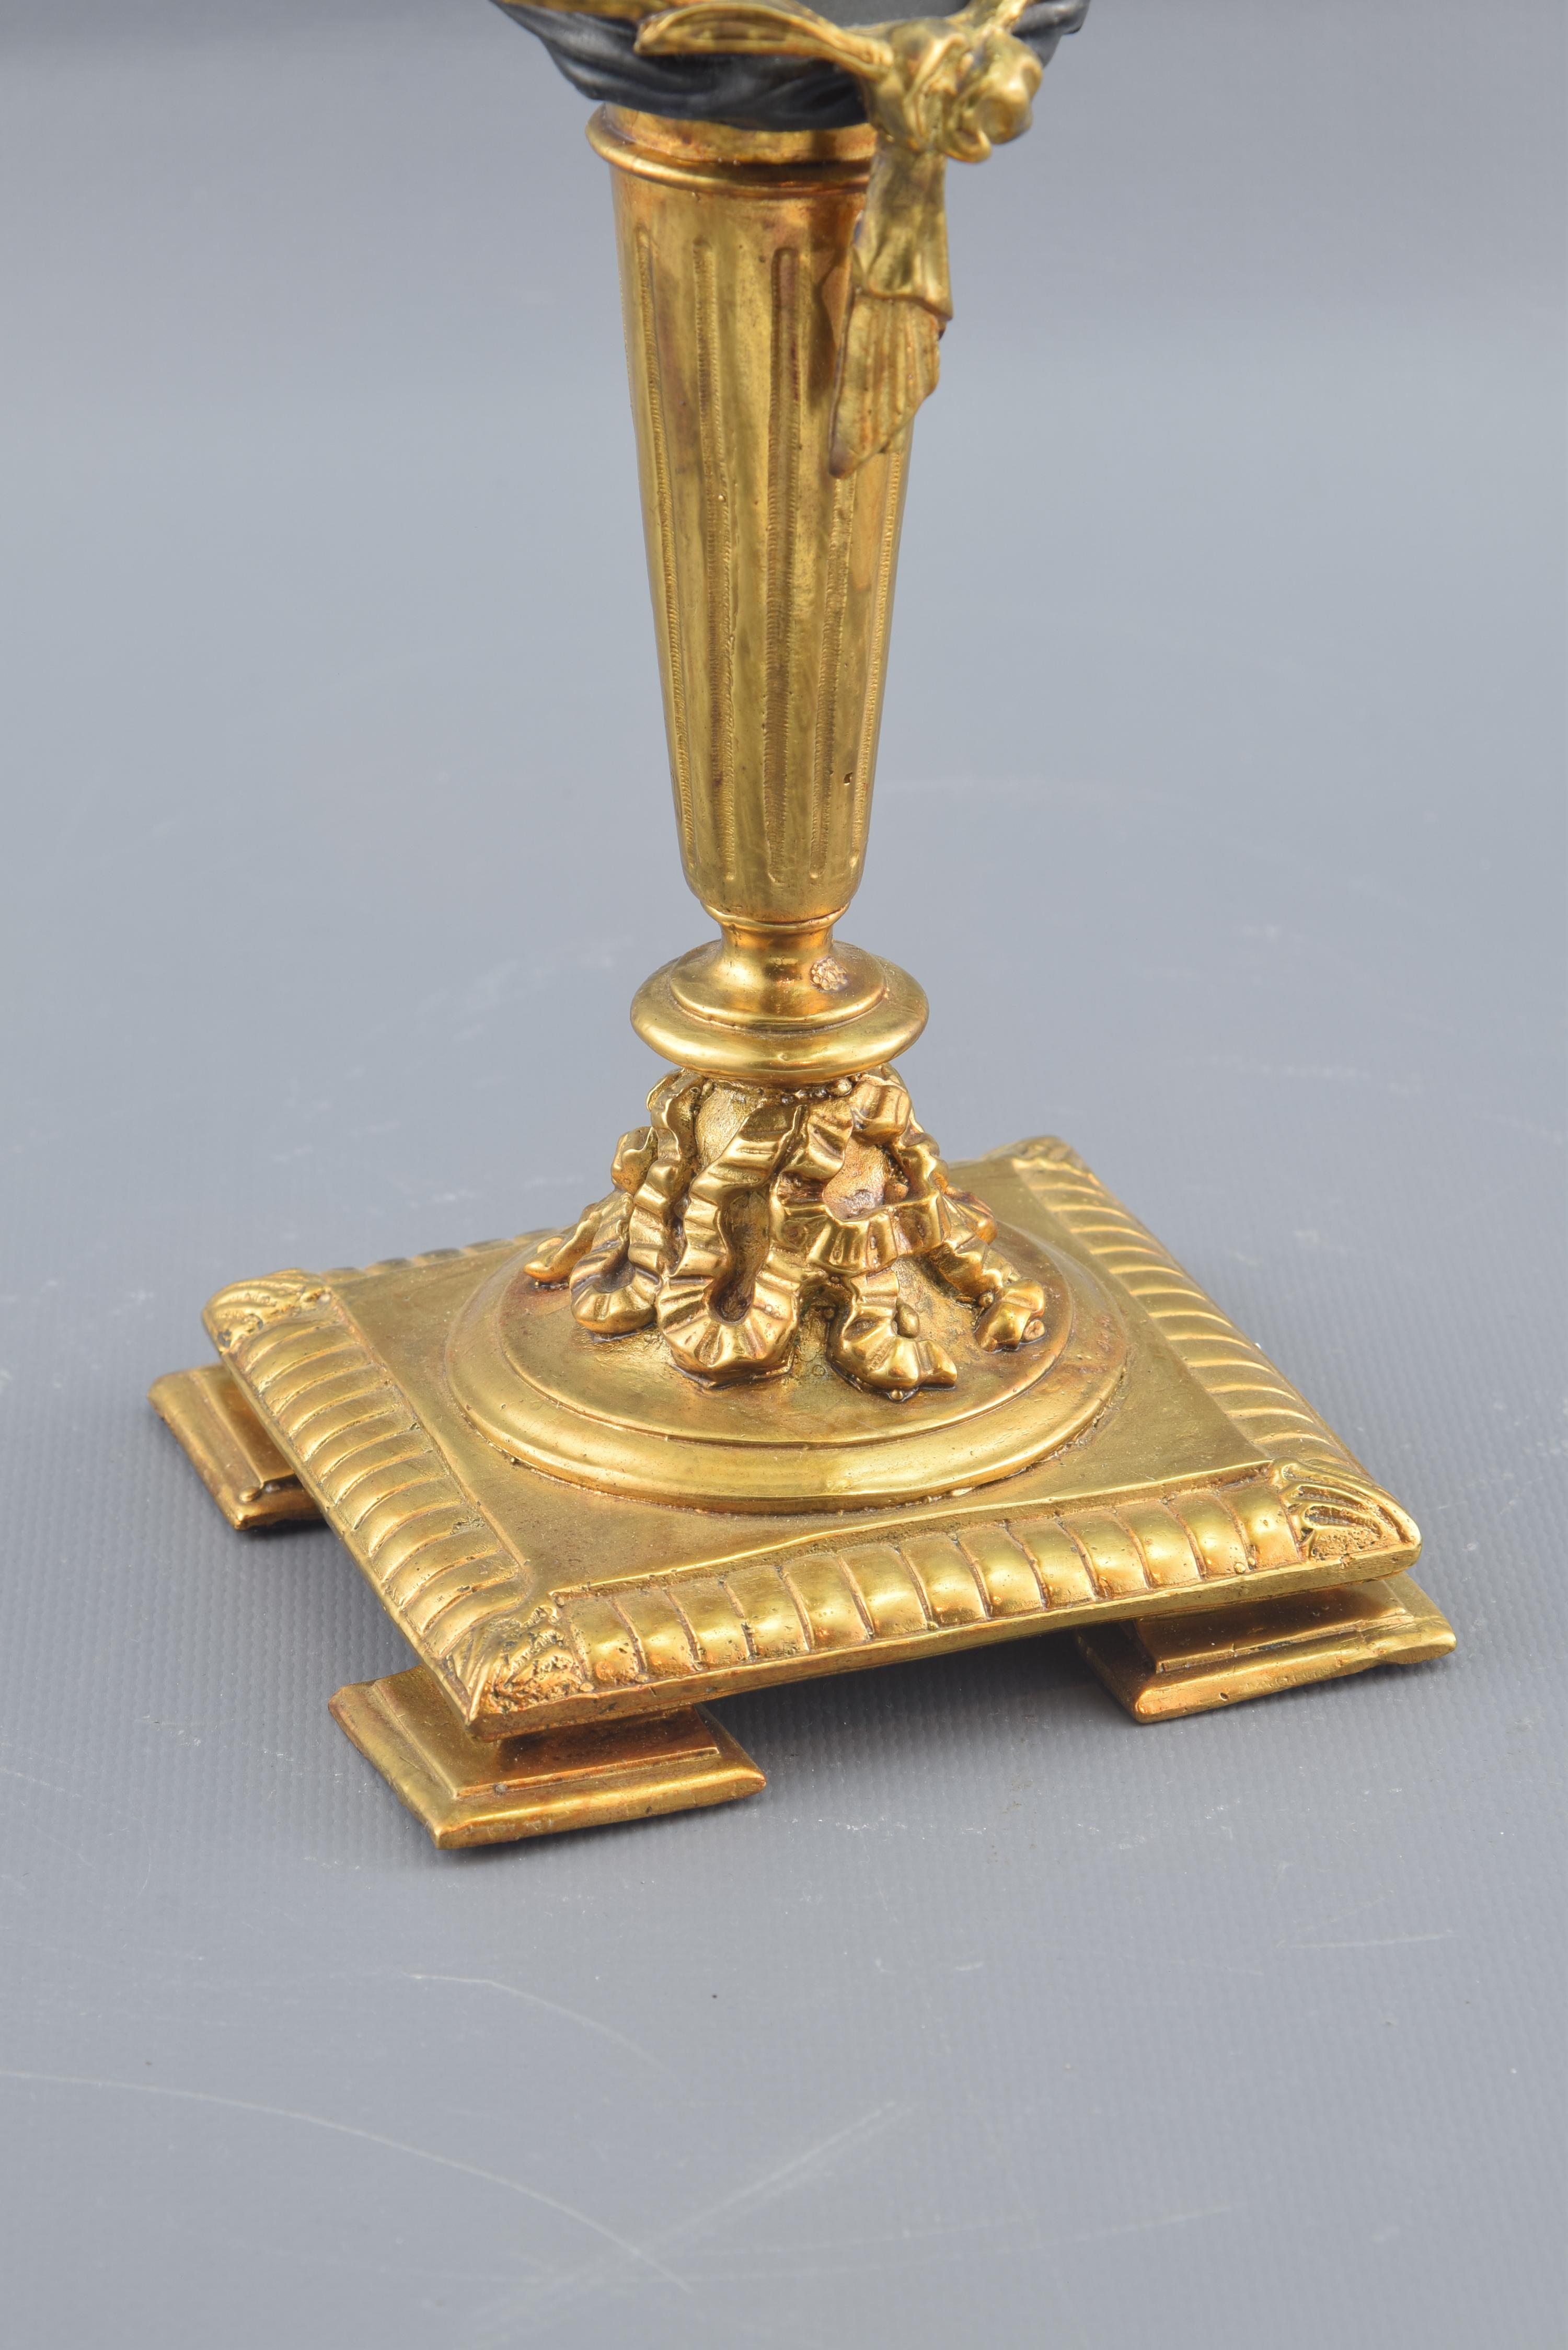 20th Century Bronze Candleholder, Bronze, after Empire Style